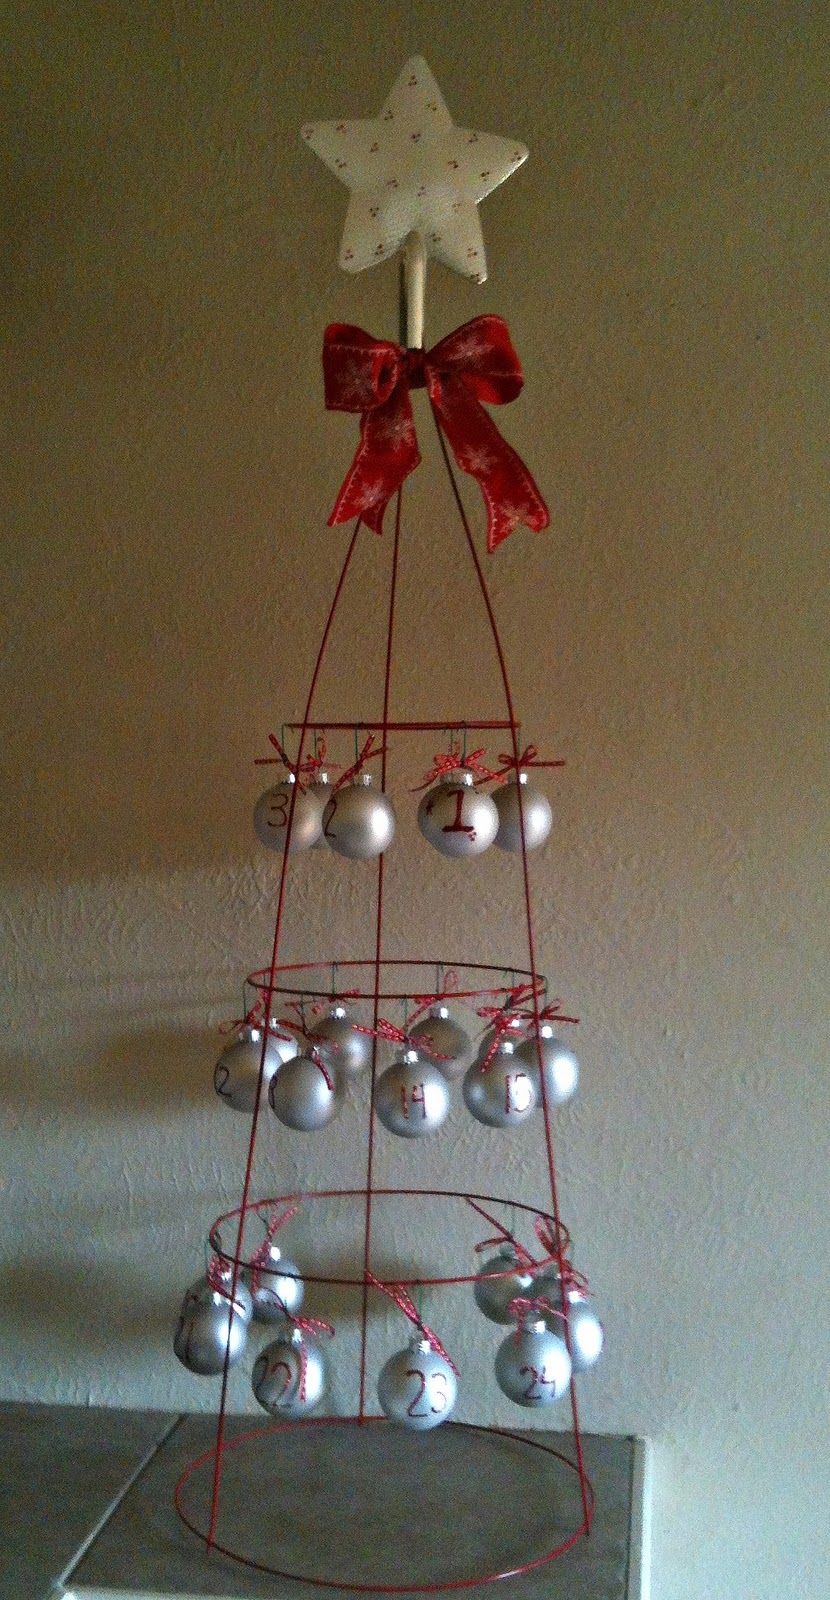 The Lung Family: Tuesday Tutorial: Tomato Cage Advent Calendar